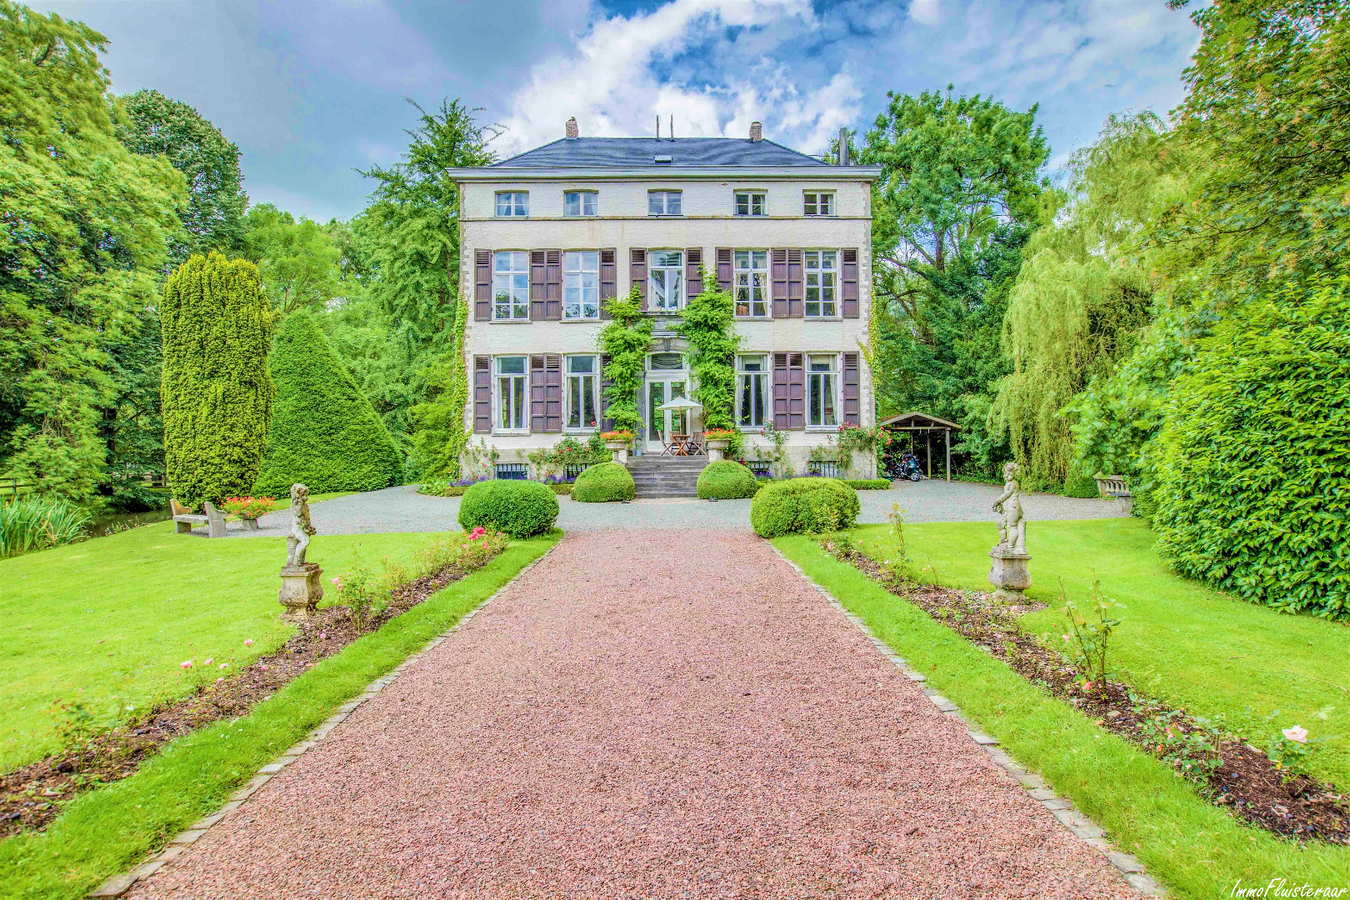 Castle for sale in Asse